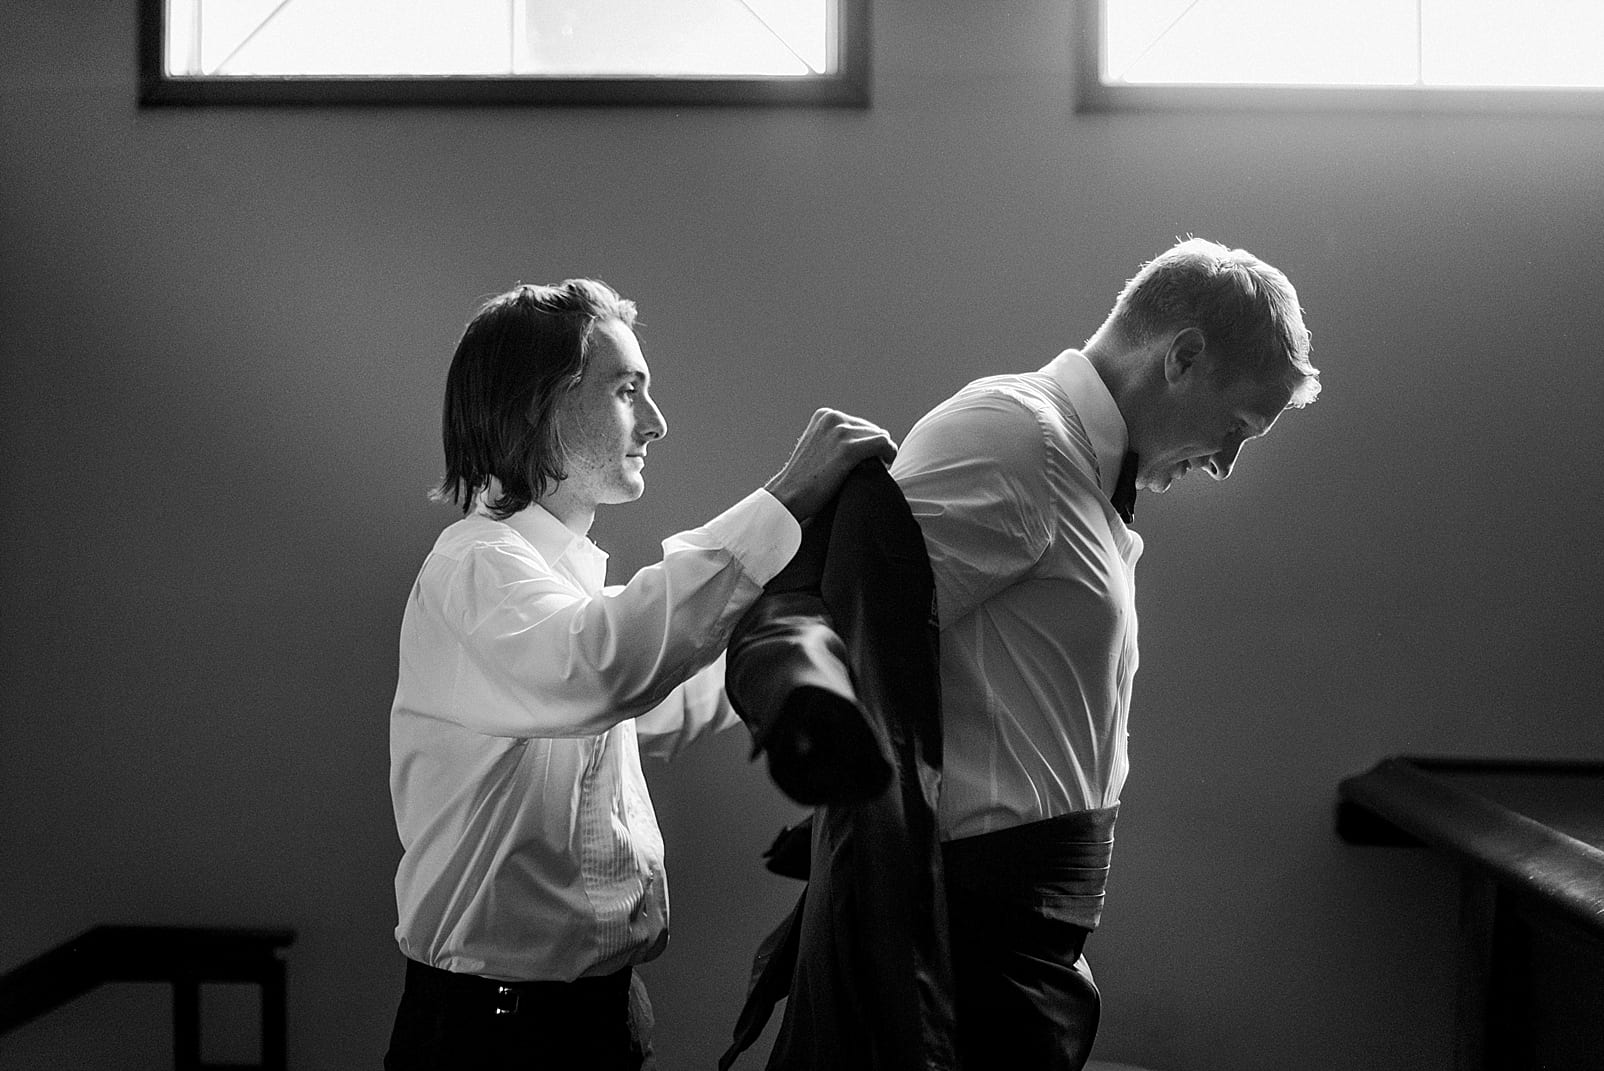 james river wedding photographer groom getting ready suit jacket photo